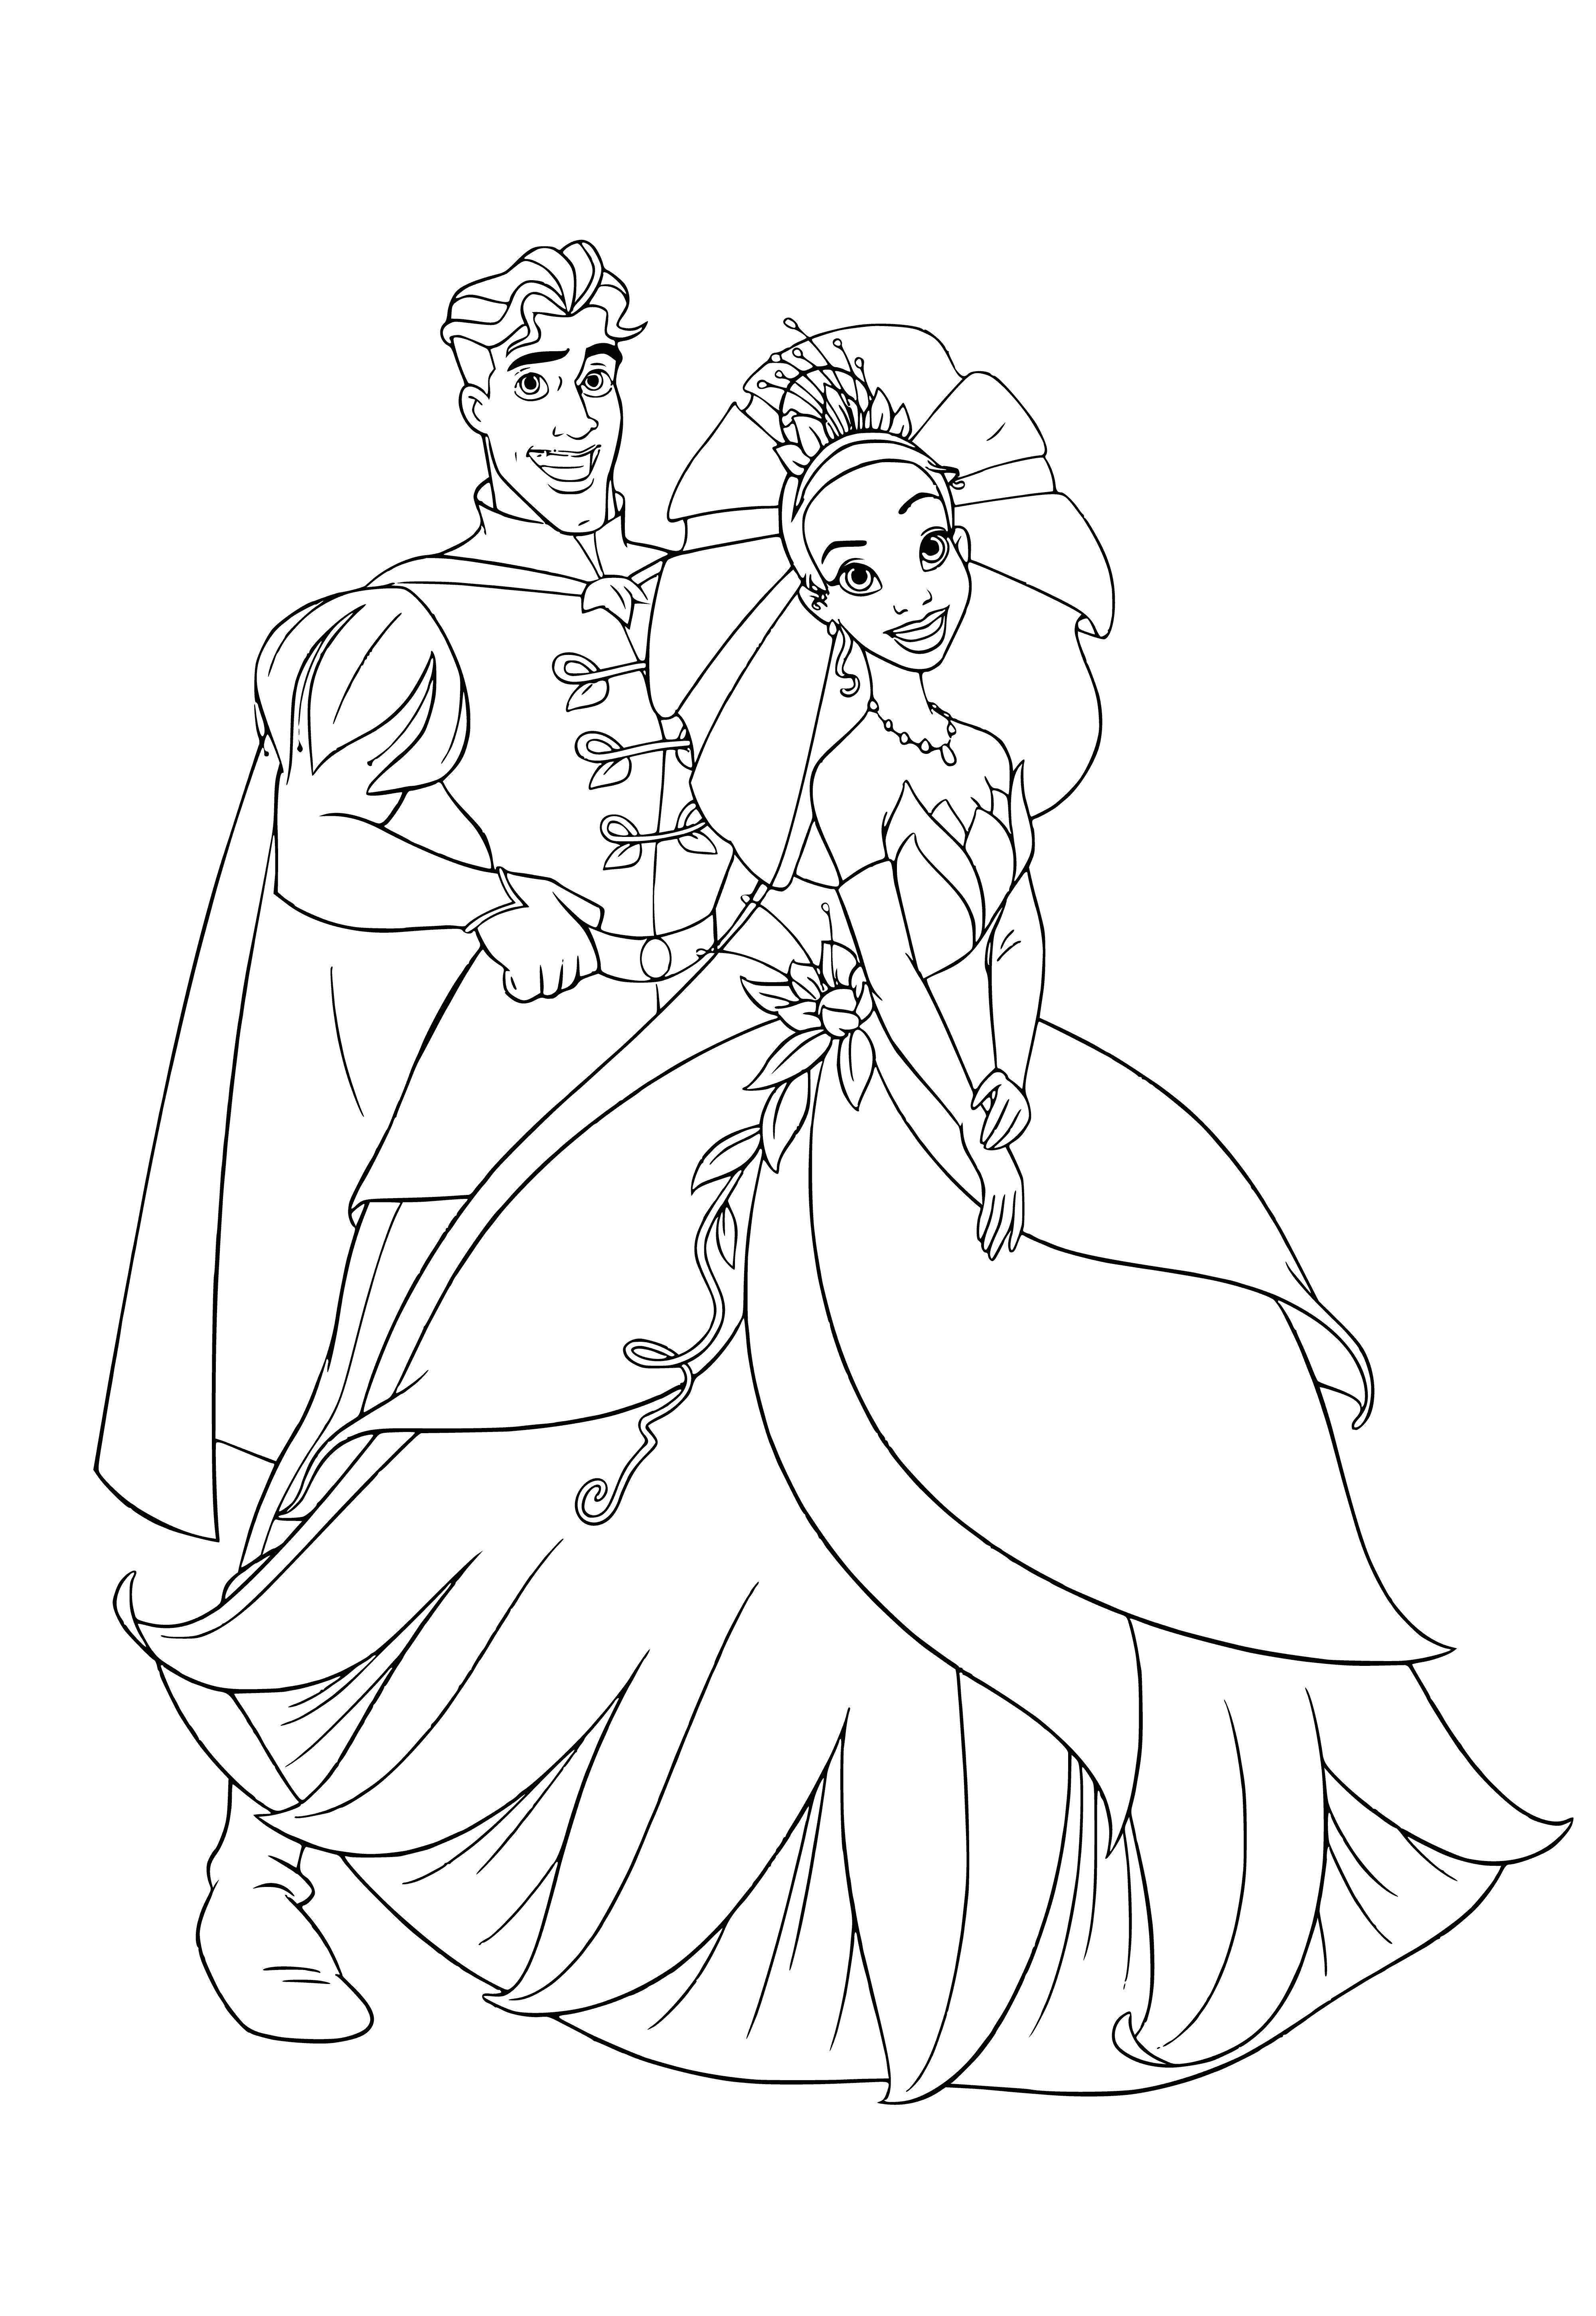 coloring page: Young woman & man look at each other & smile; she holds a blue flower--likely Princess Tiana & Prince Naveen. #disneyprincess